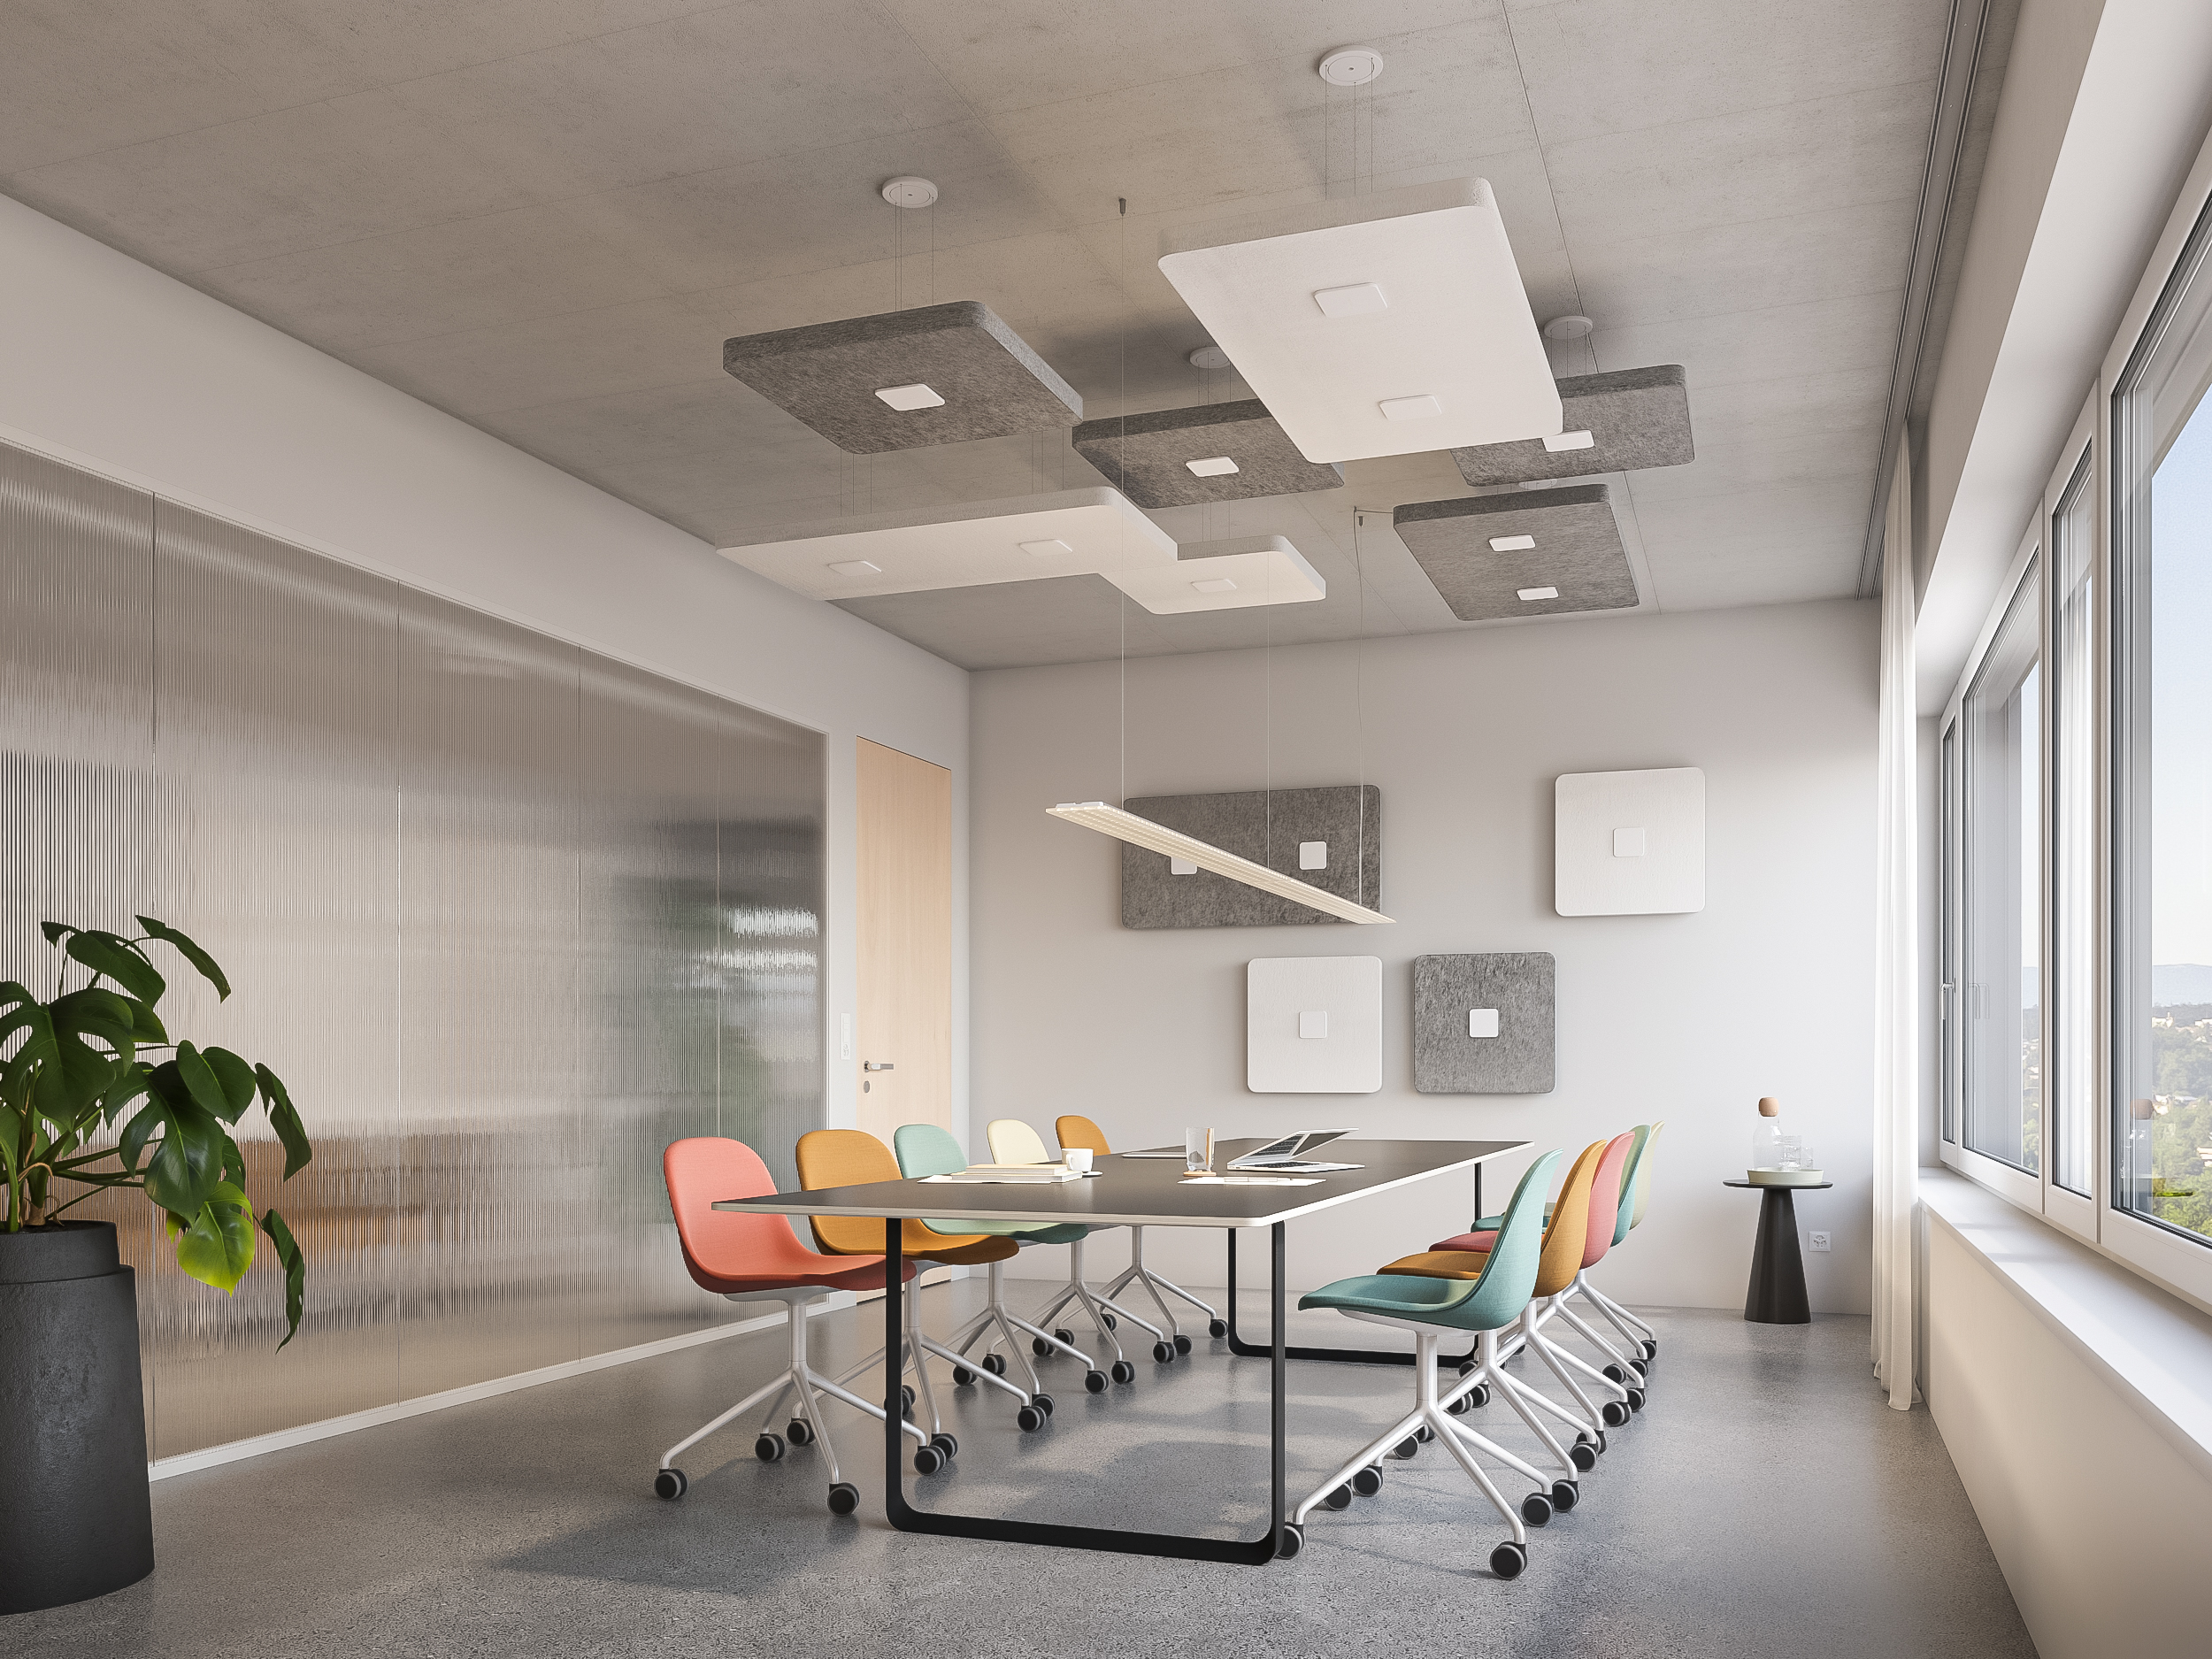 DISC´N DOTS Q 600 andDISC´N DOTS Q 600 DOUBLE with DOTS WHITE suspended from the ceiling and mounted directly on the wall.